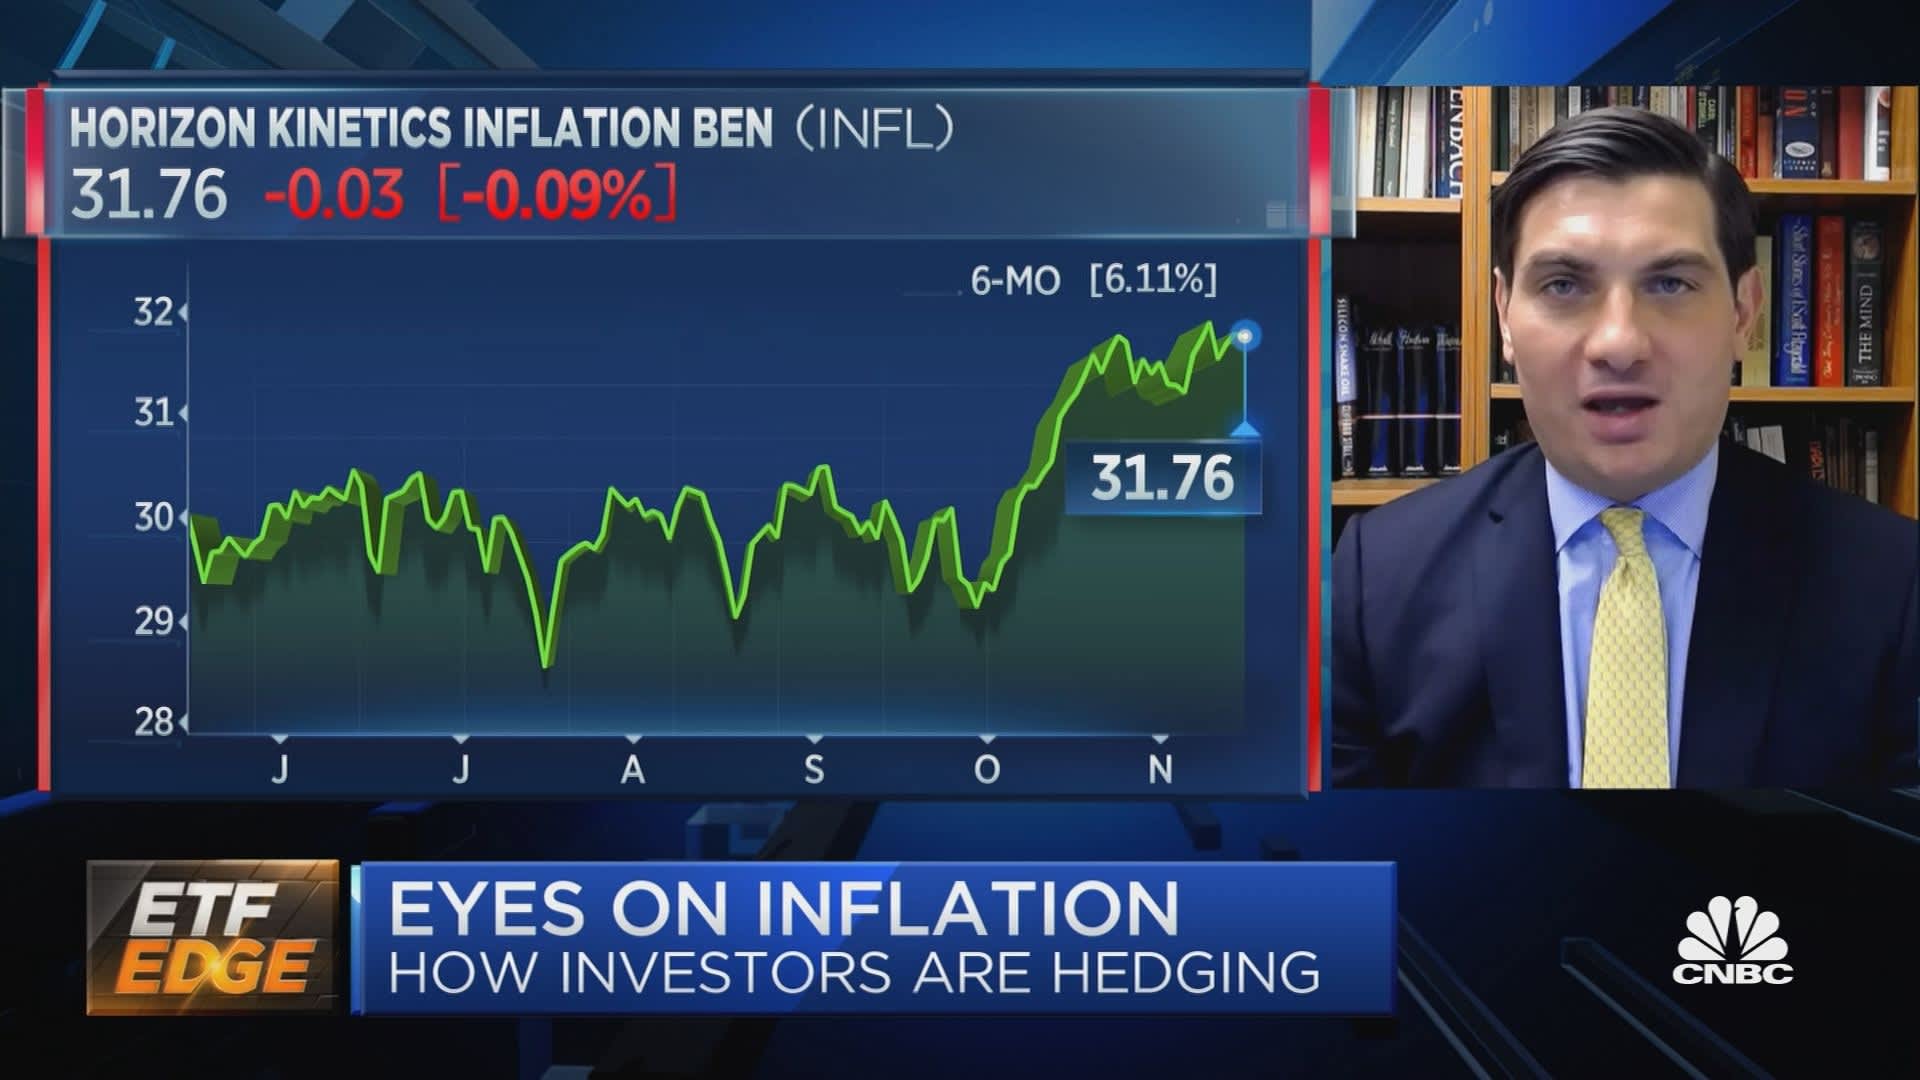 etf hedge against inflation investing